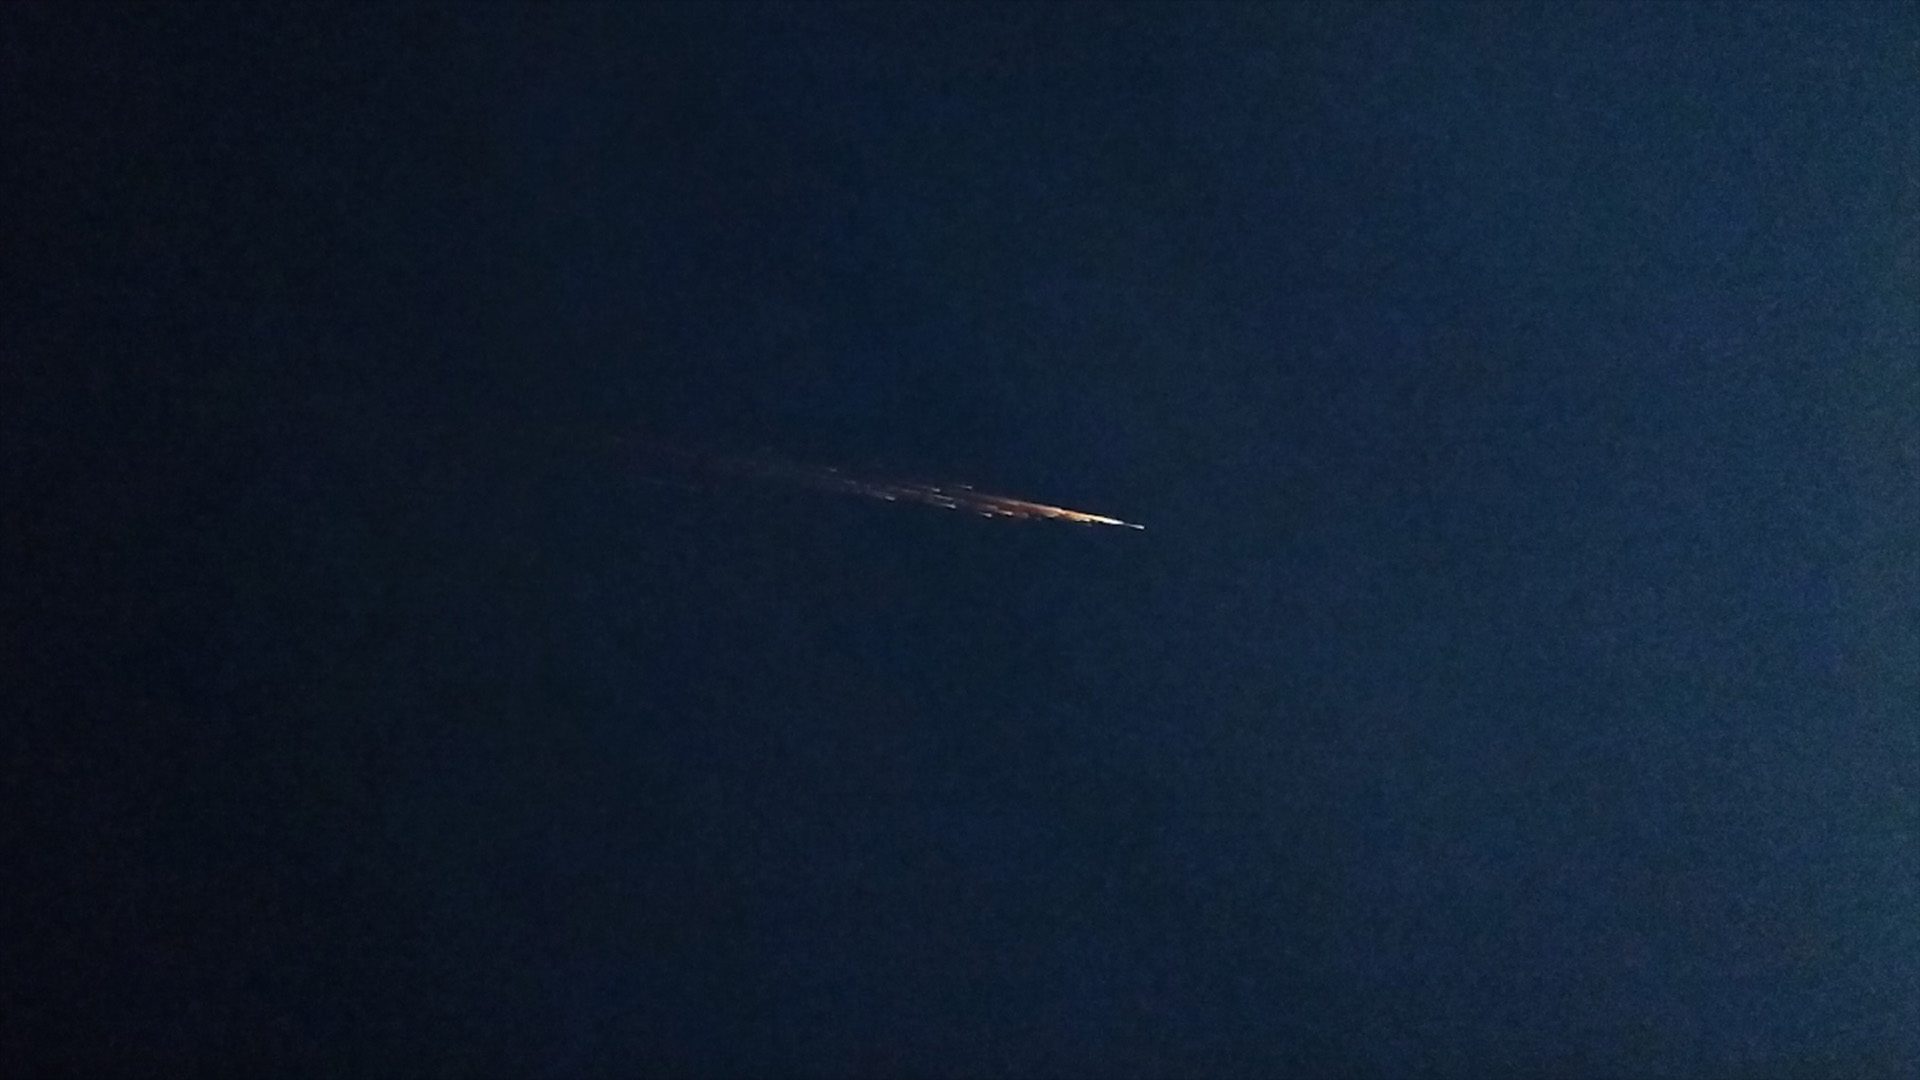 Chinese space junk falls to Earth over Southern California, creating spectacular fireball